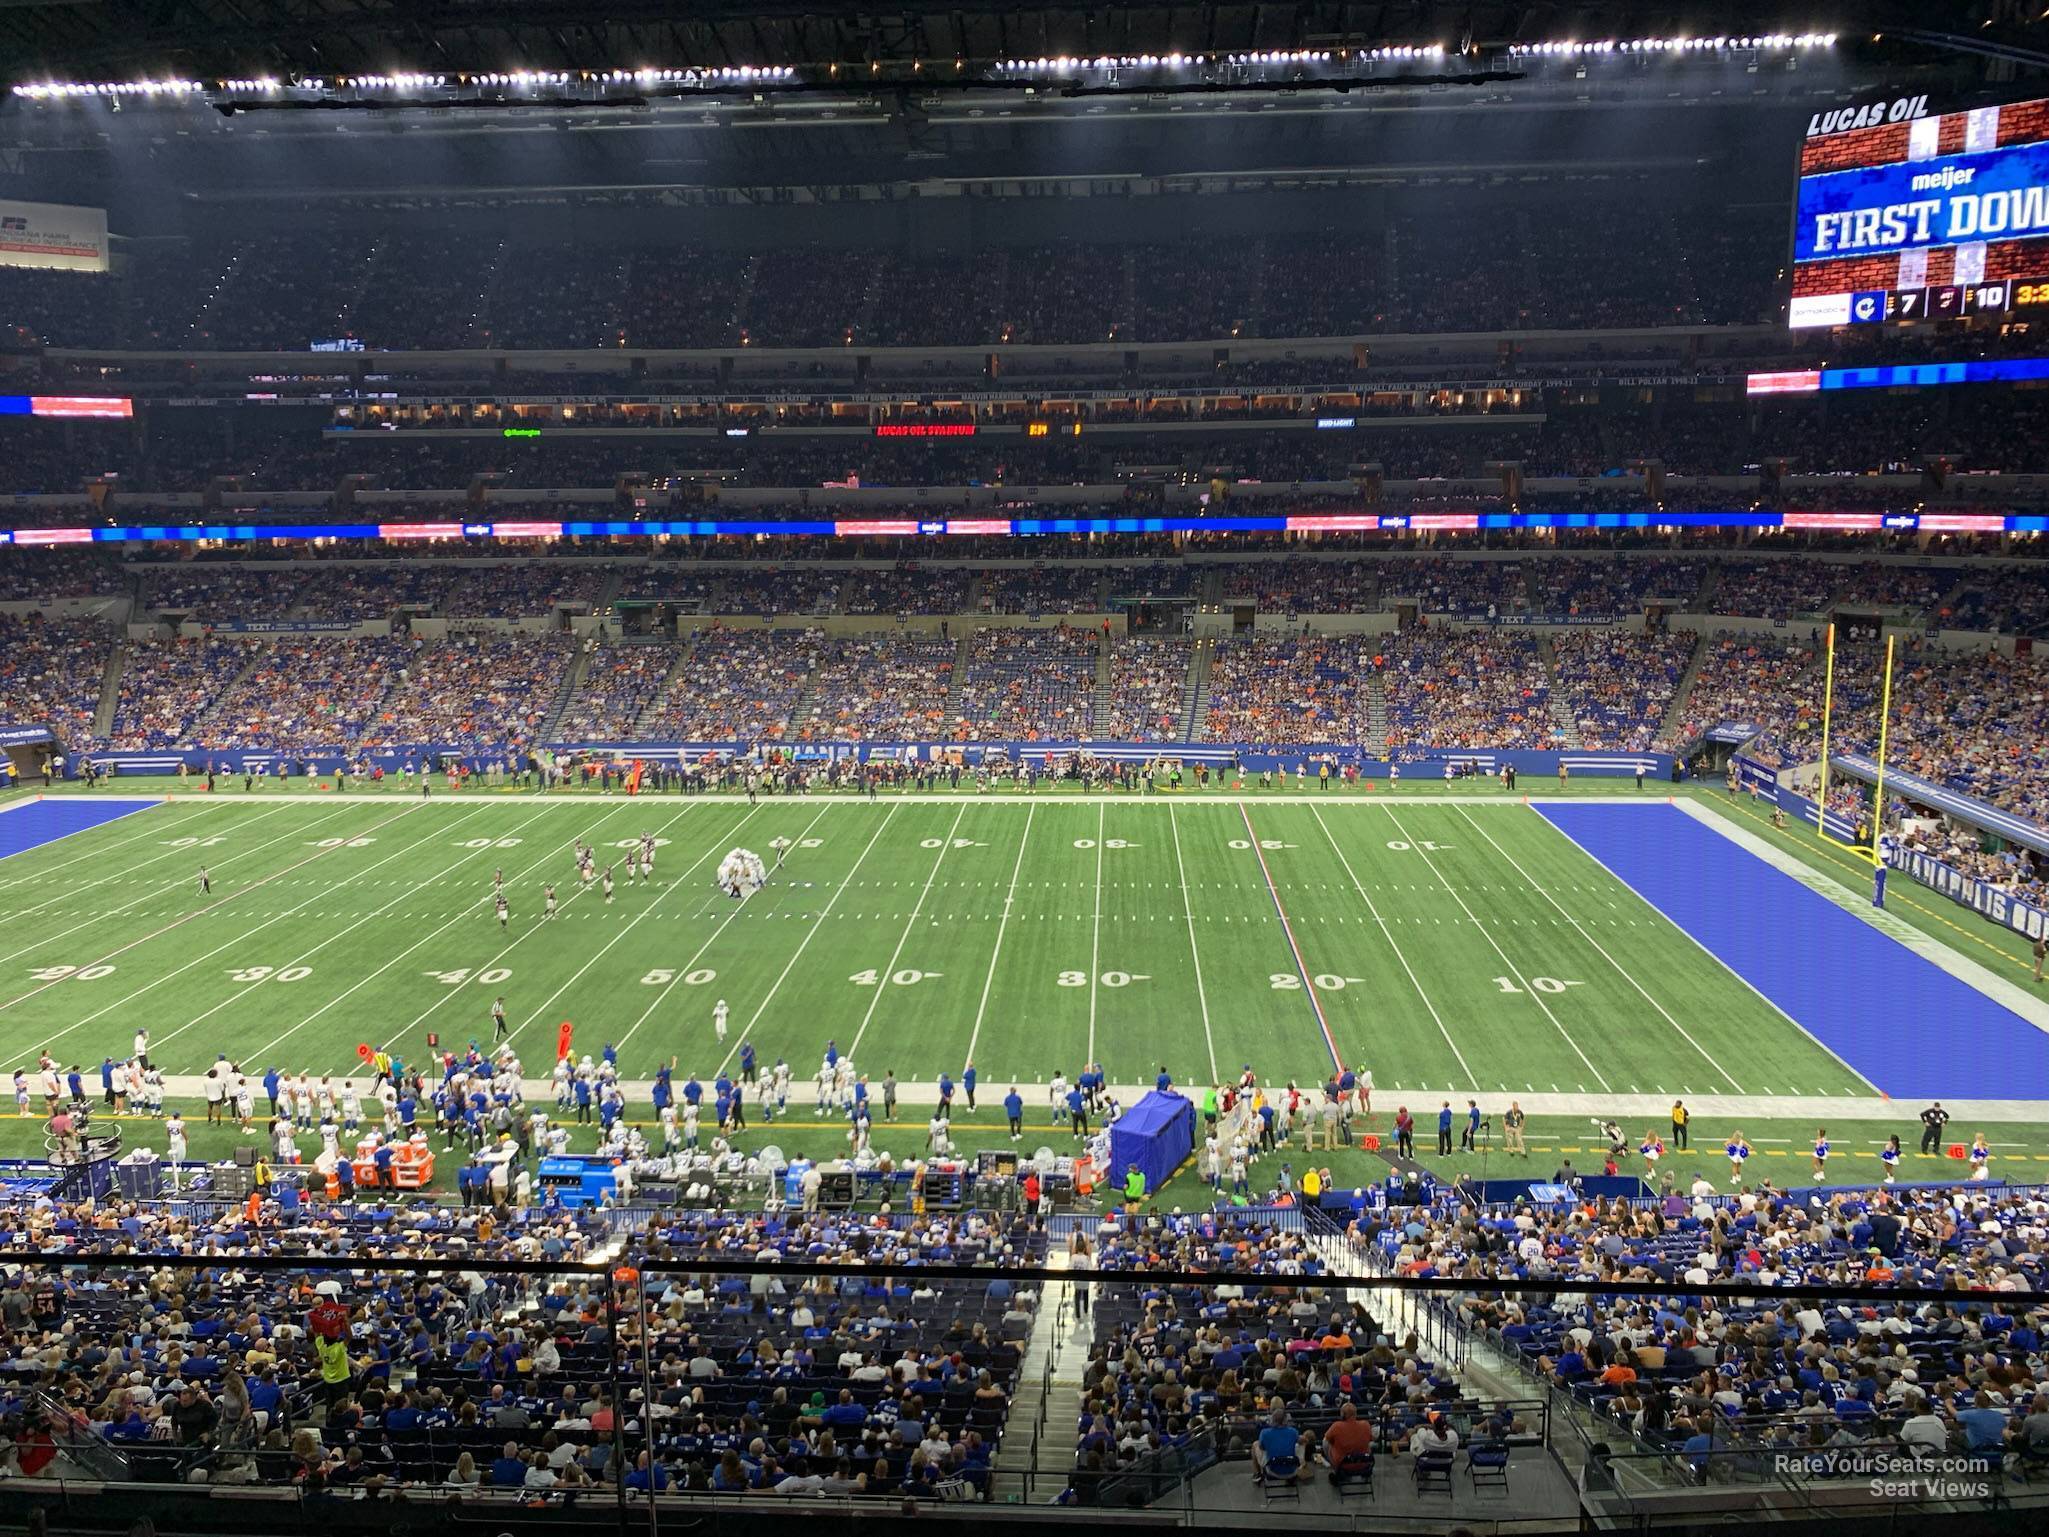 section 439, row 1 seat view  for football - lucas oil stadium